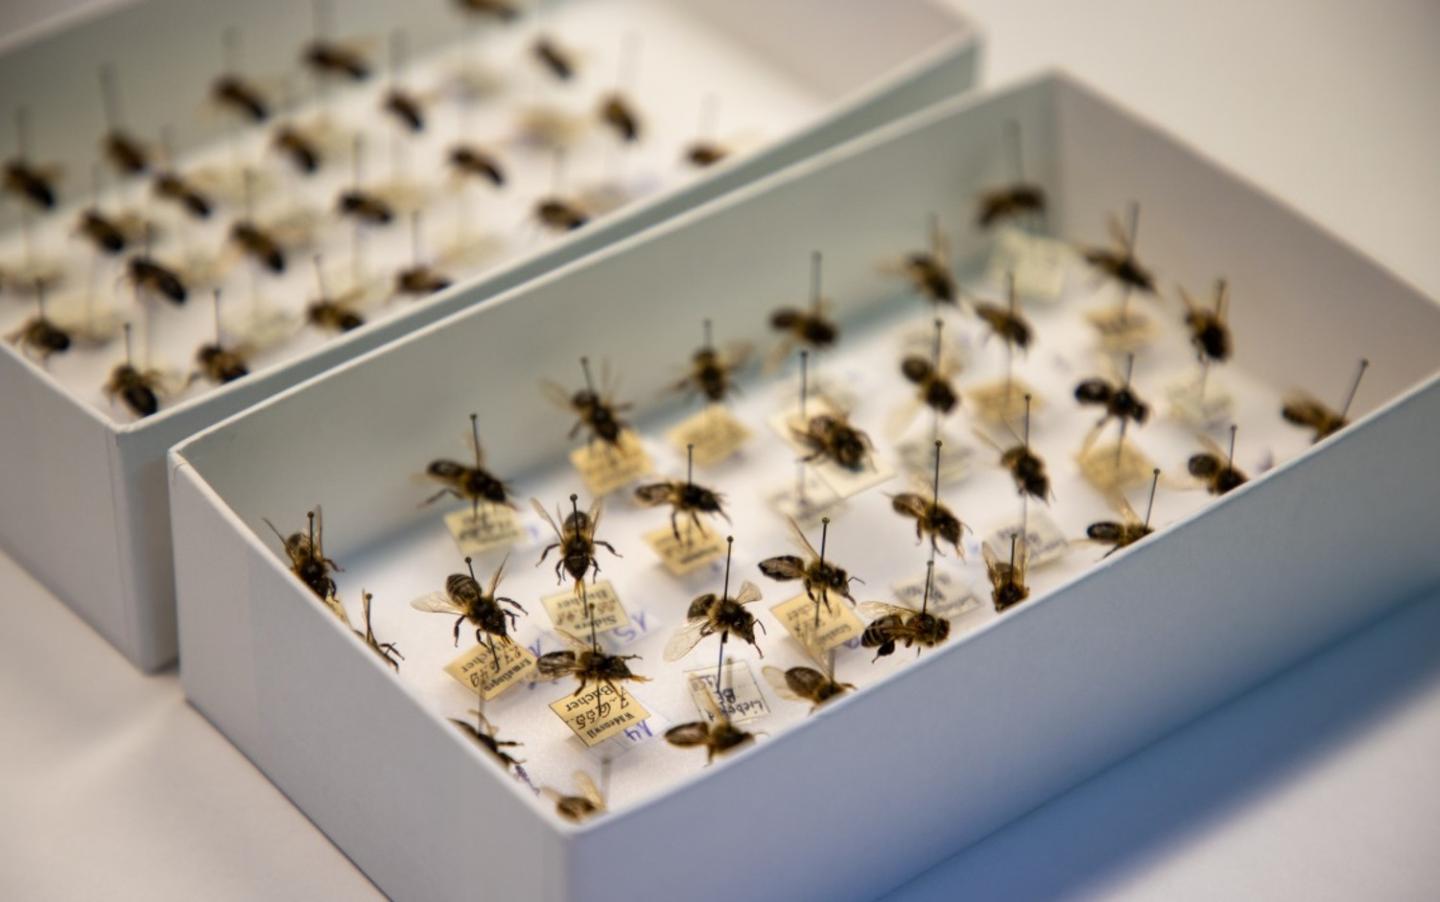 Bee specimens from the Natural History Museum in Bern, Switzerland.